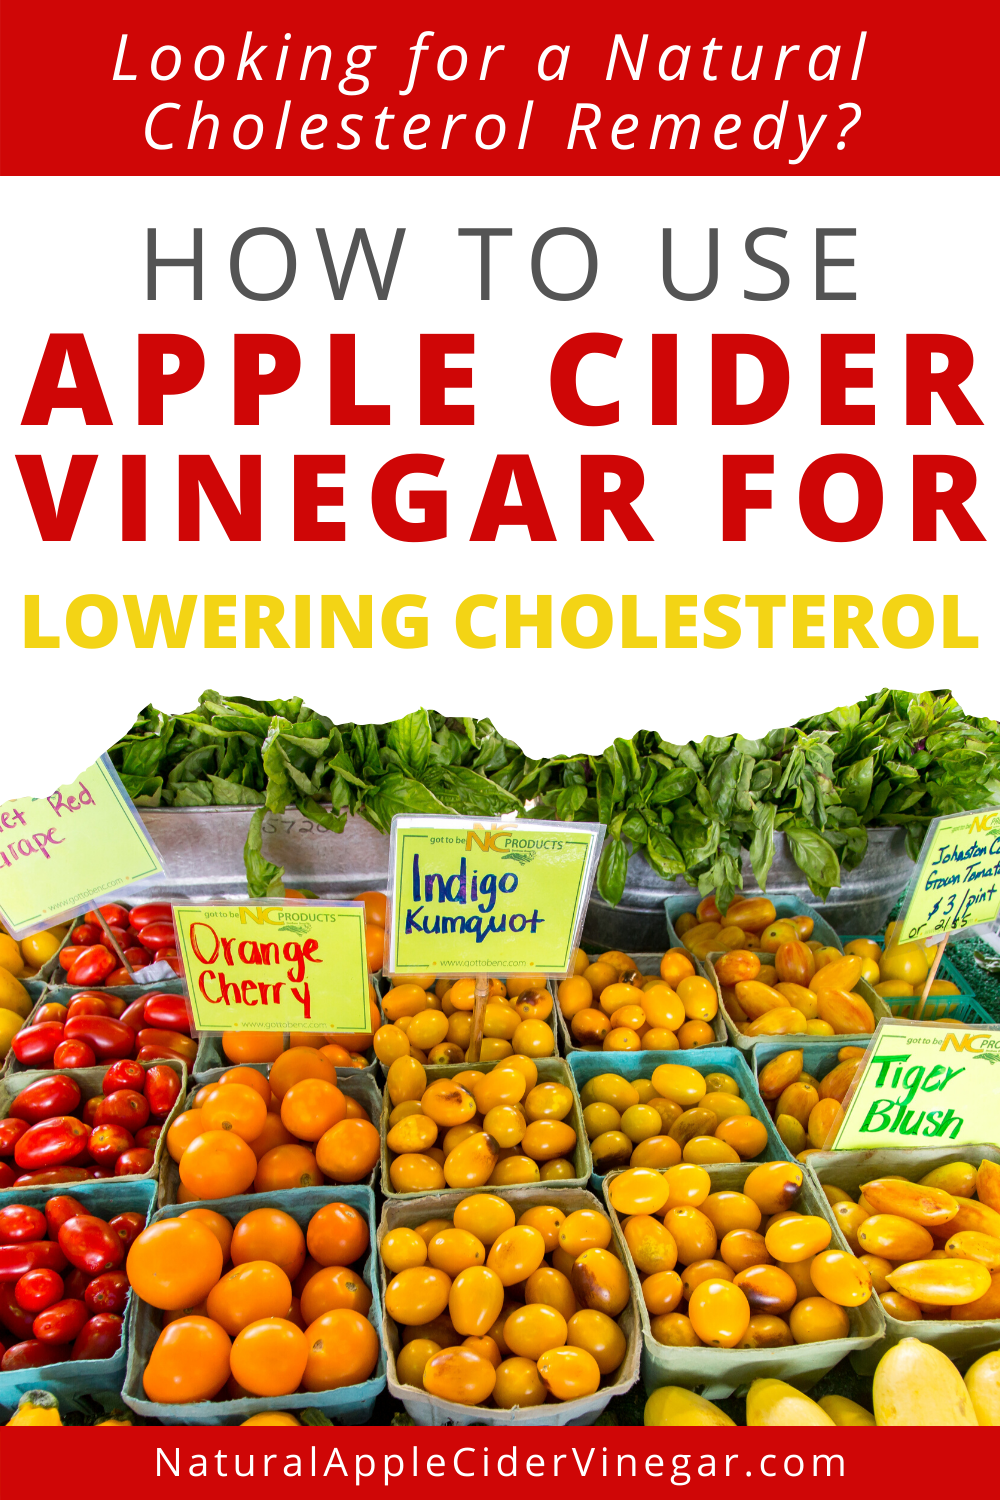 How to Use Apple Cider Vinegar for Lowering Cholesterol